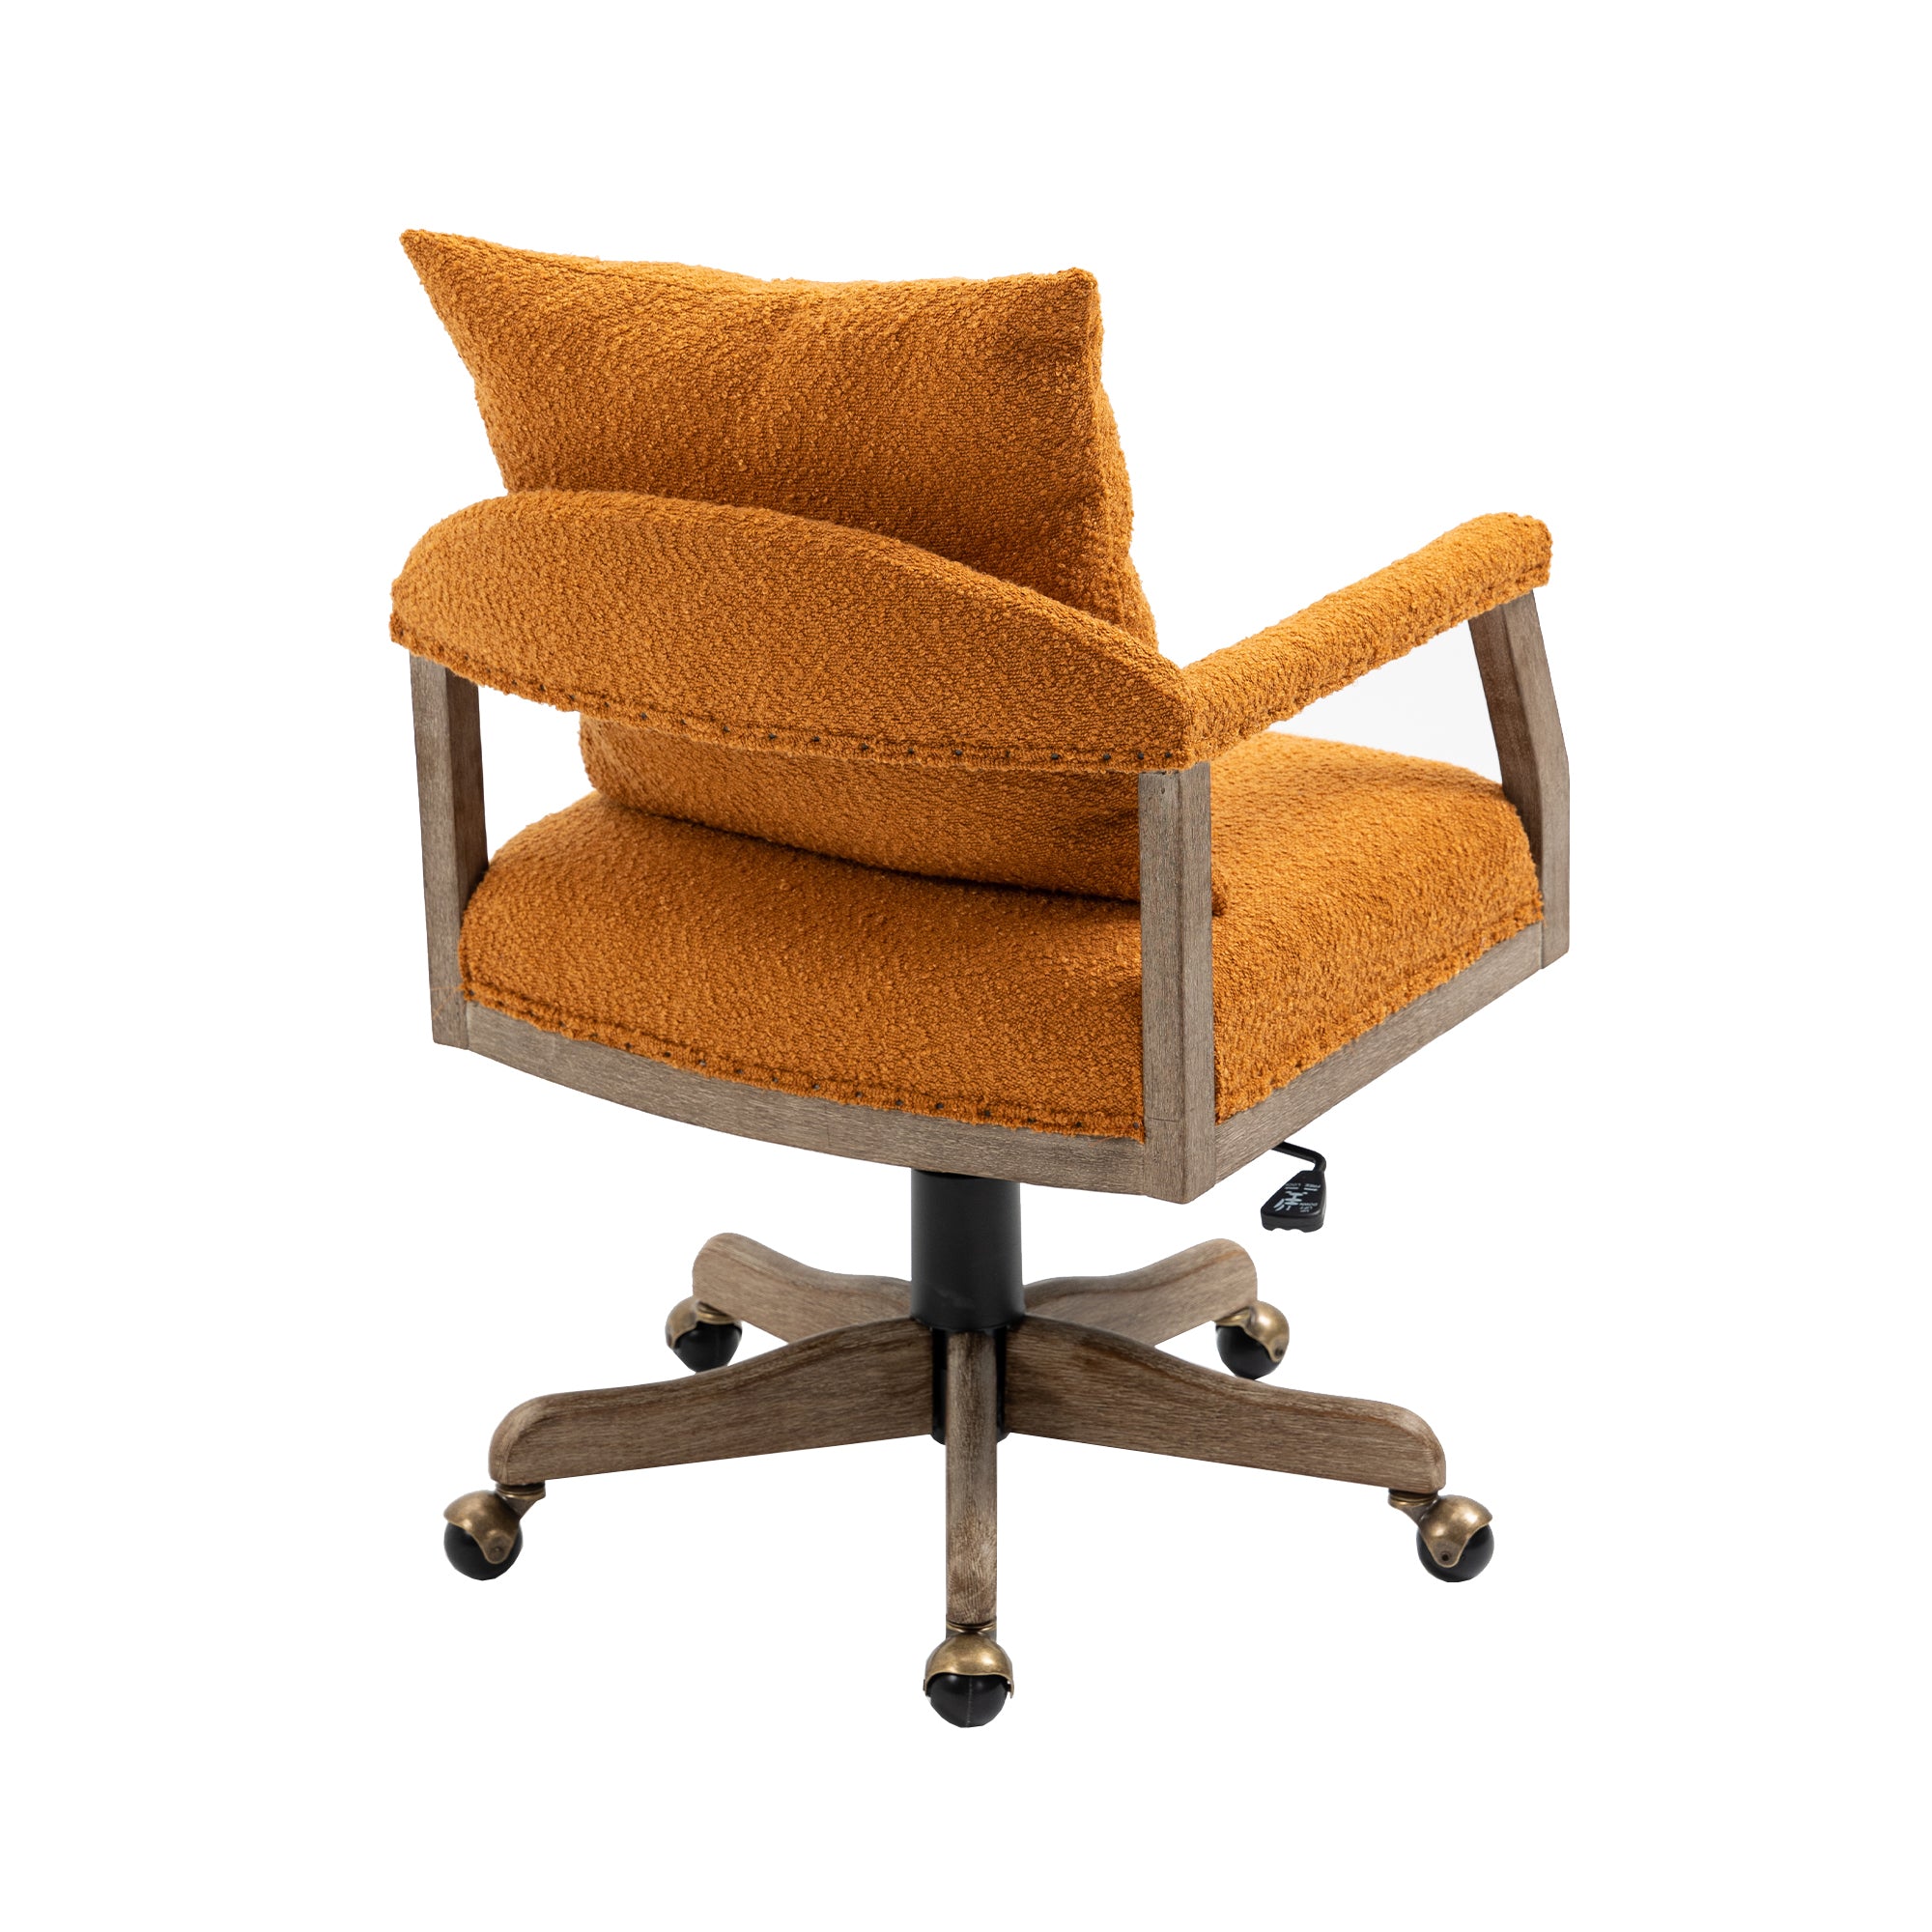 Chair Office Chair Adjustable Swivel Chair Fabric Seat Home Study Chair - Orange